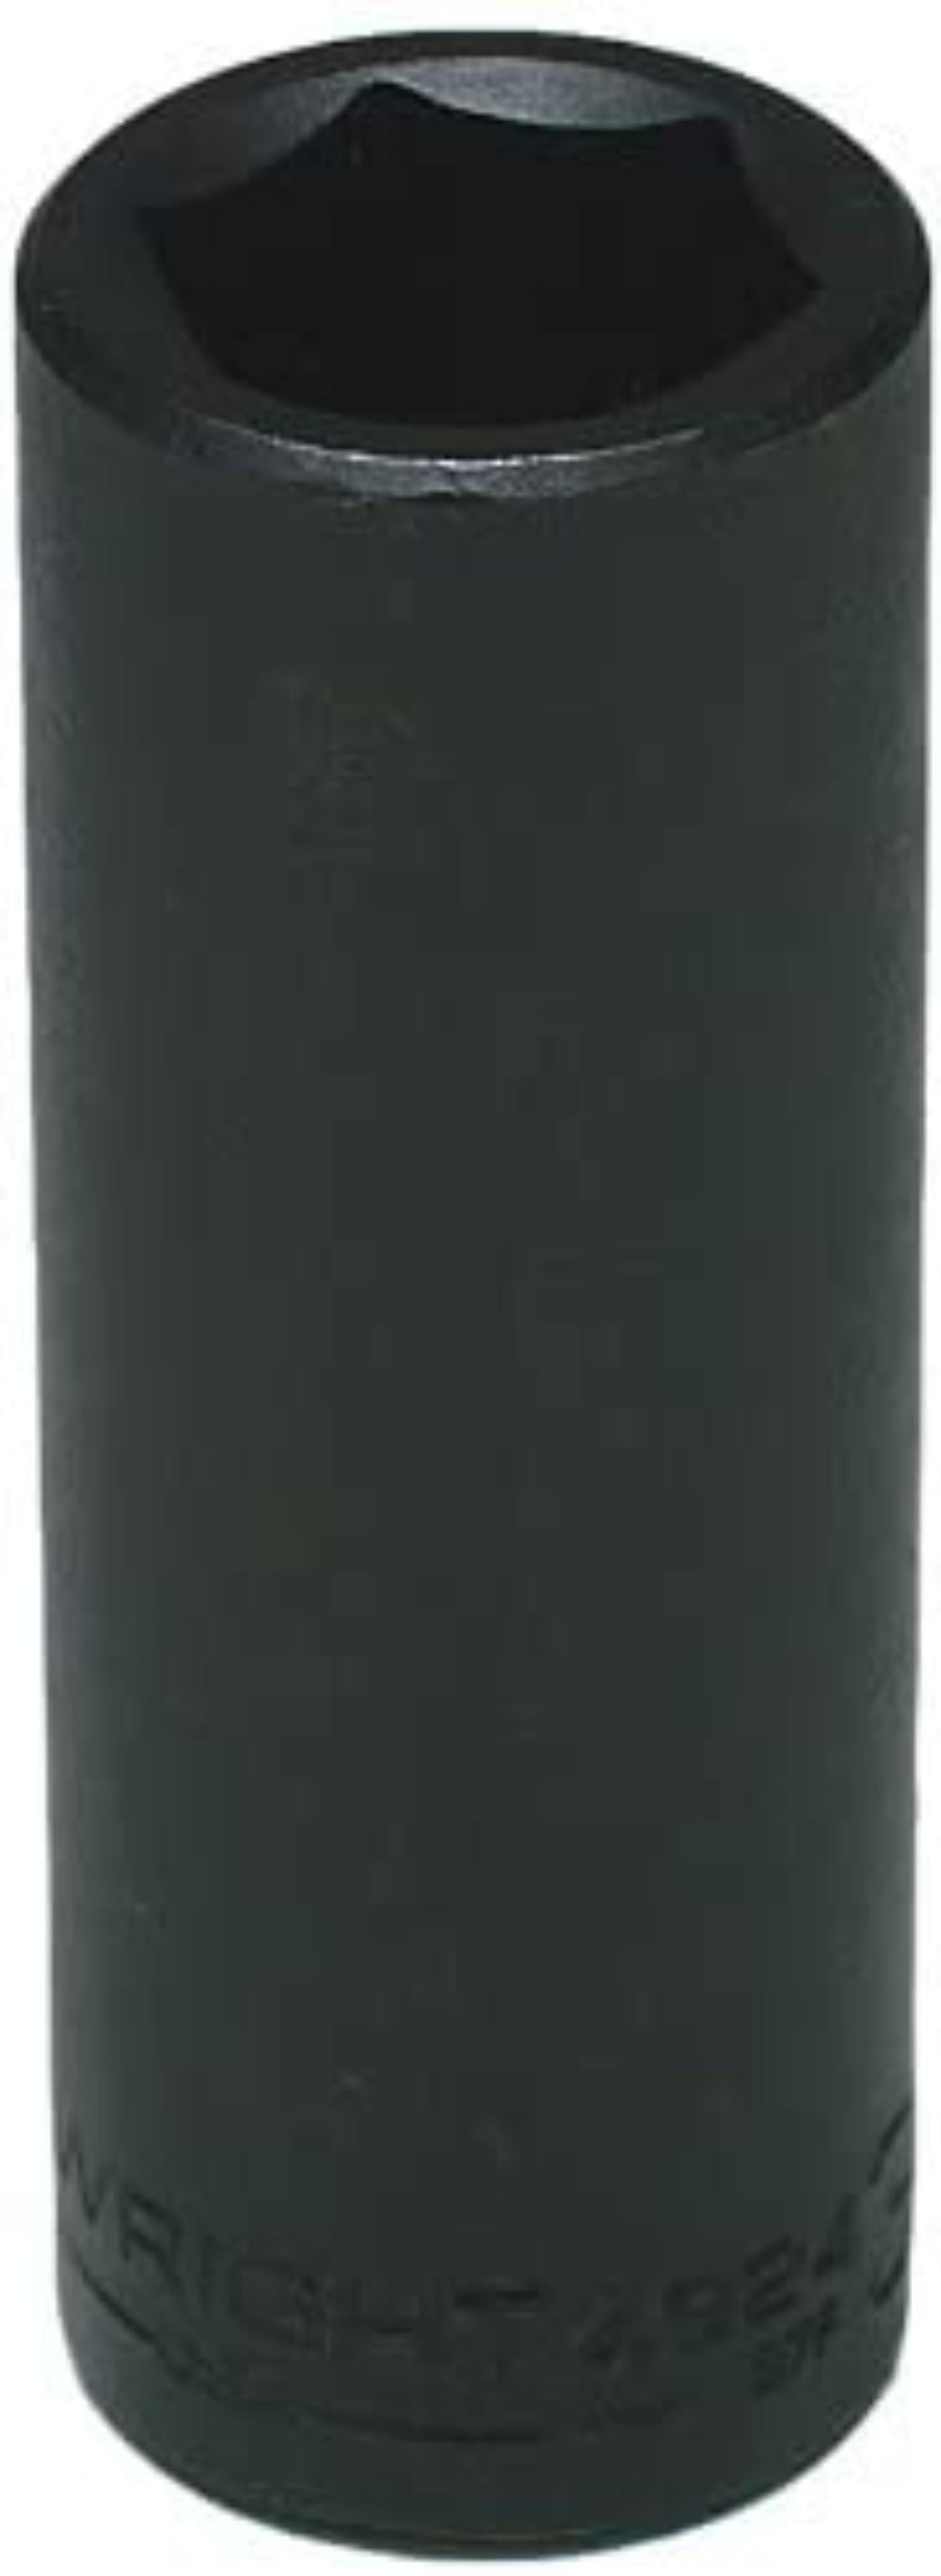 1/2" Drive 6 Point Deep Impact Socket for sale online Wright Tool 4924 3/4" 